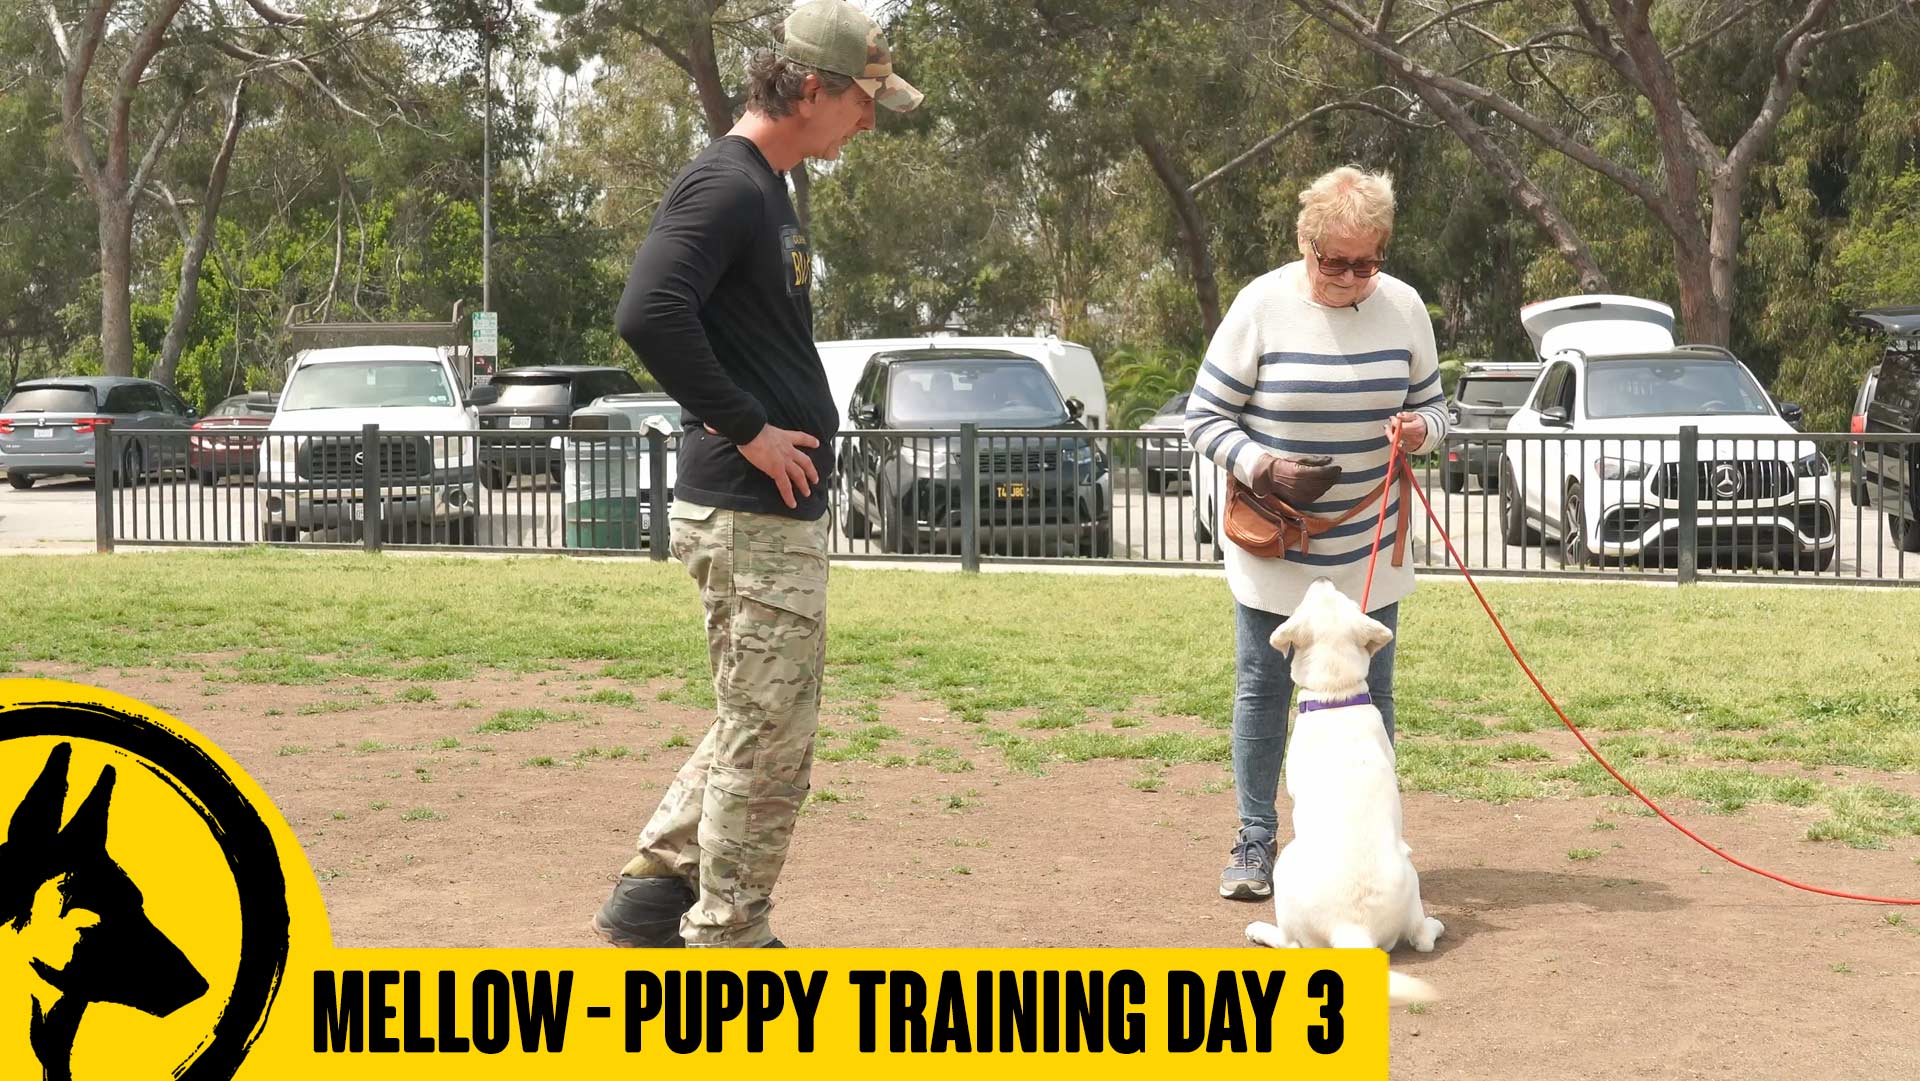 Puppy Basics – down, heel, stay, no jump, soft mouth & more.